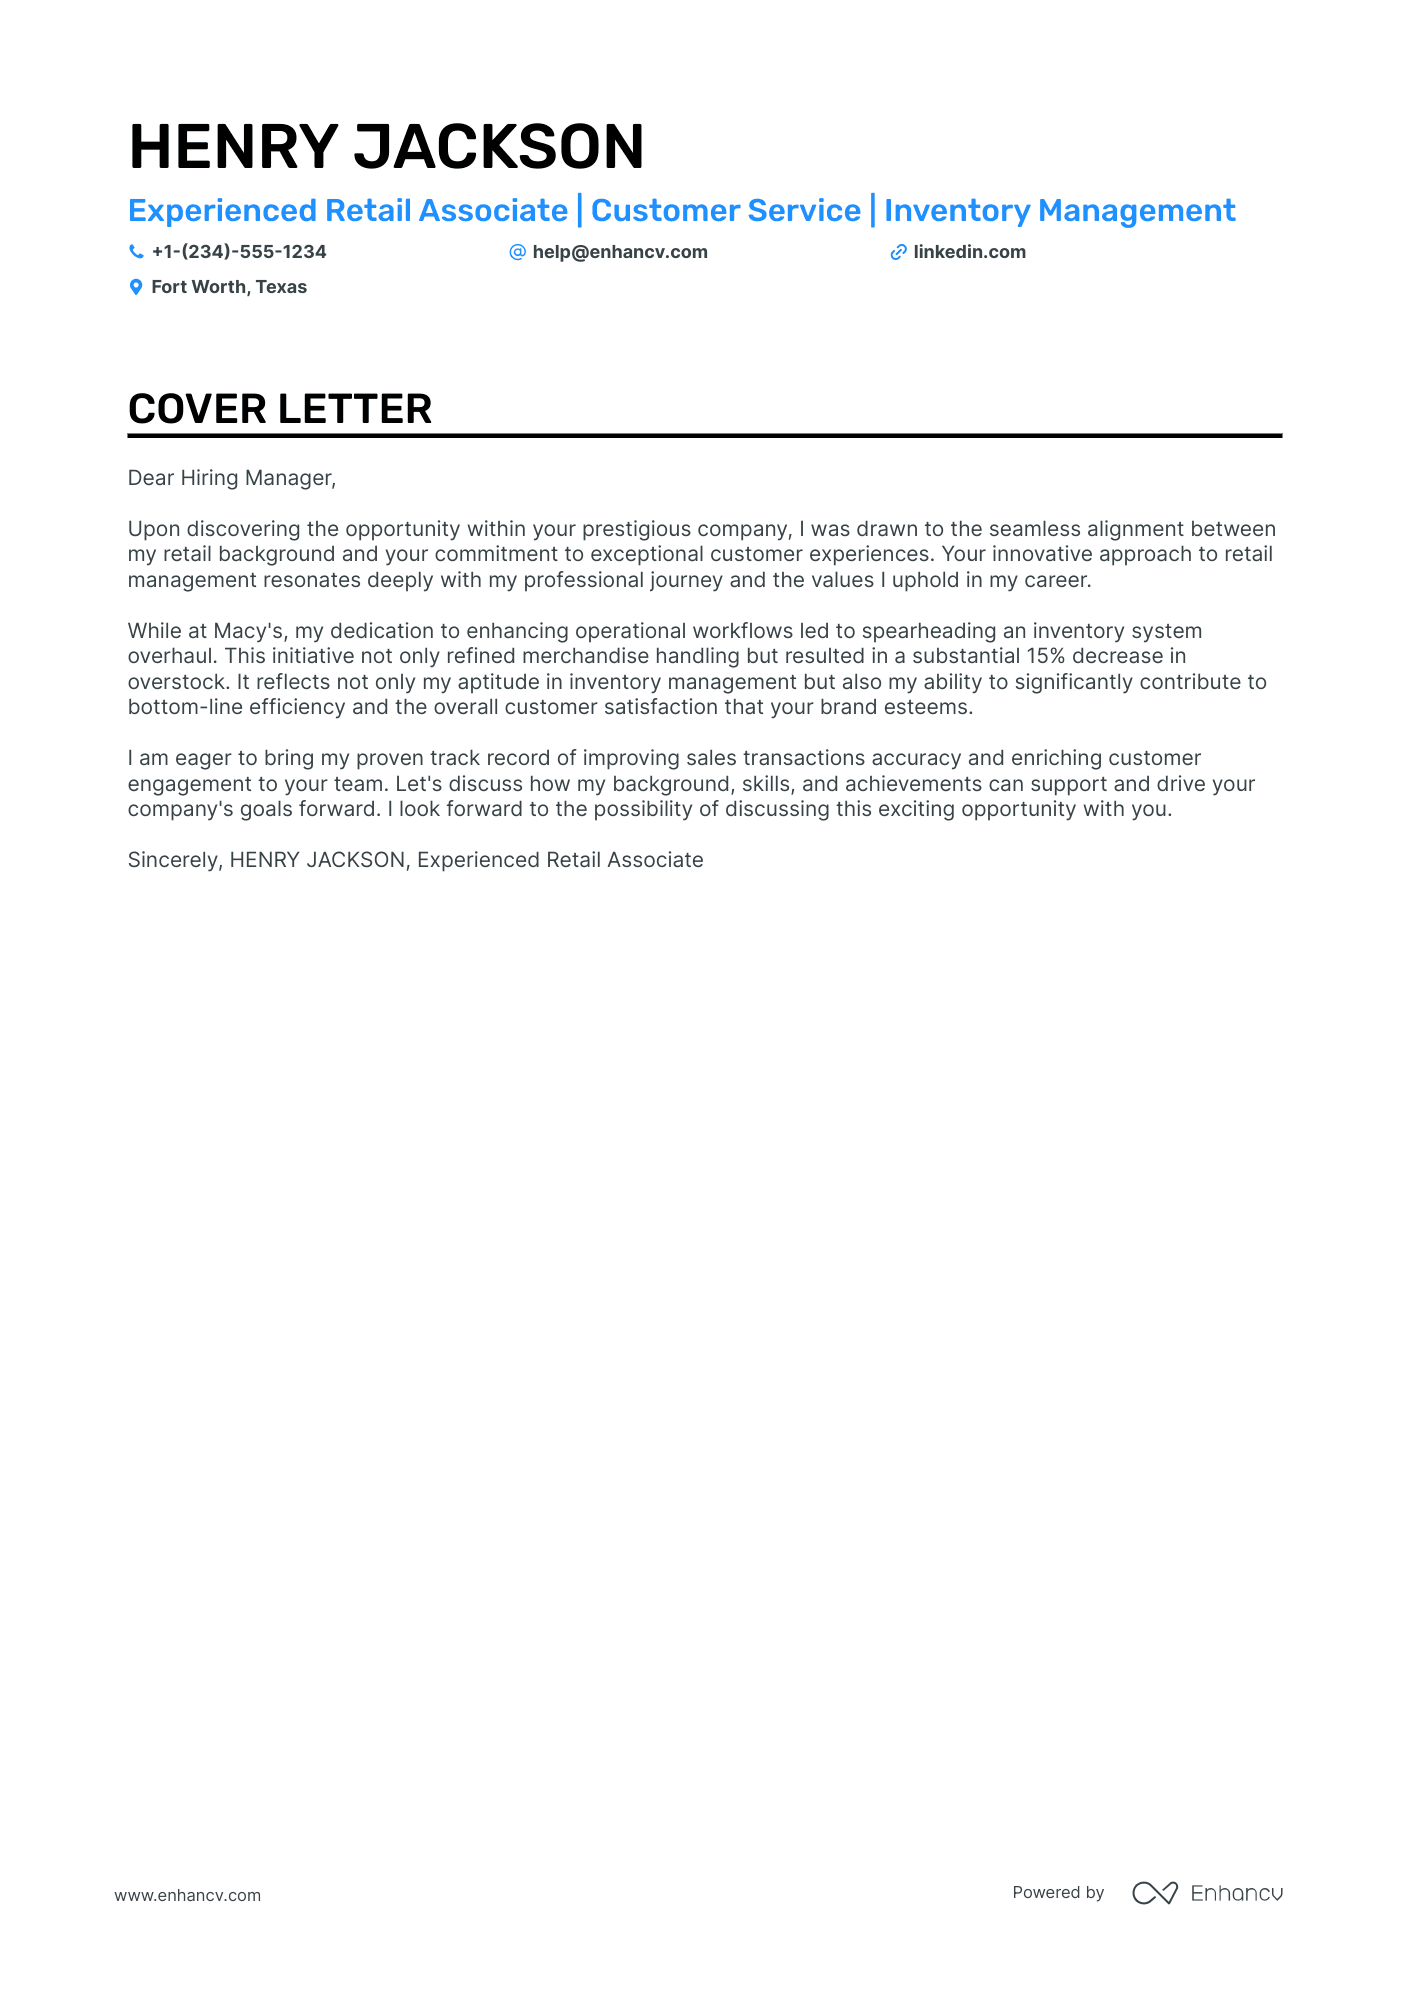 sample cover letter for cashier position with experience